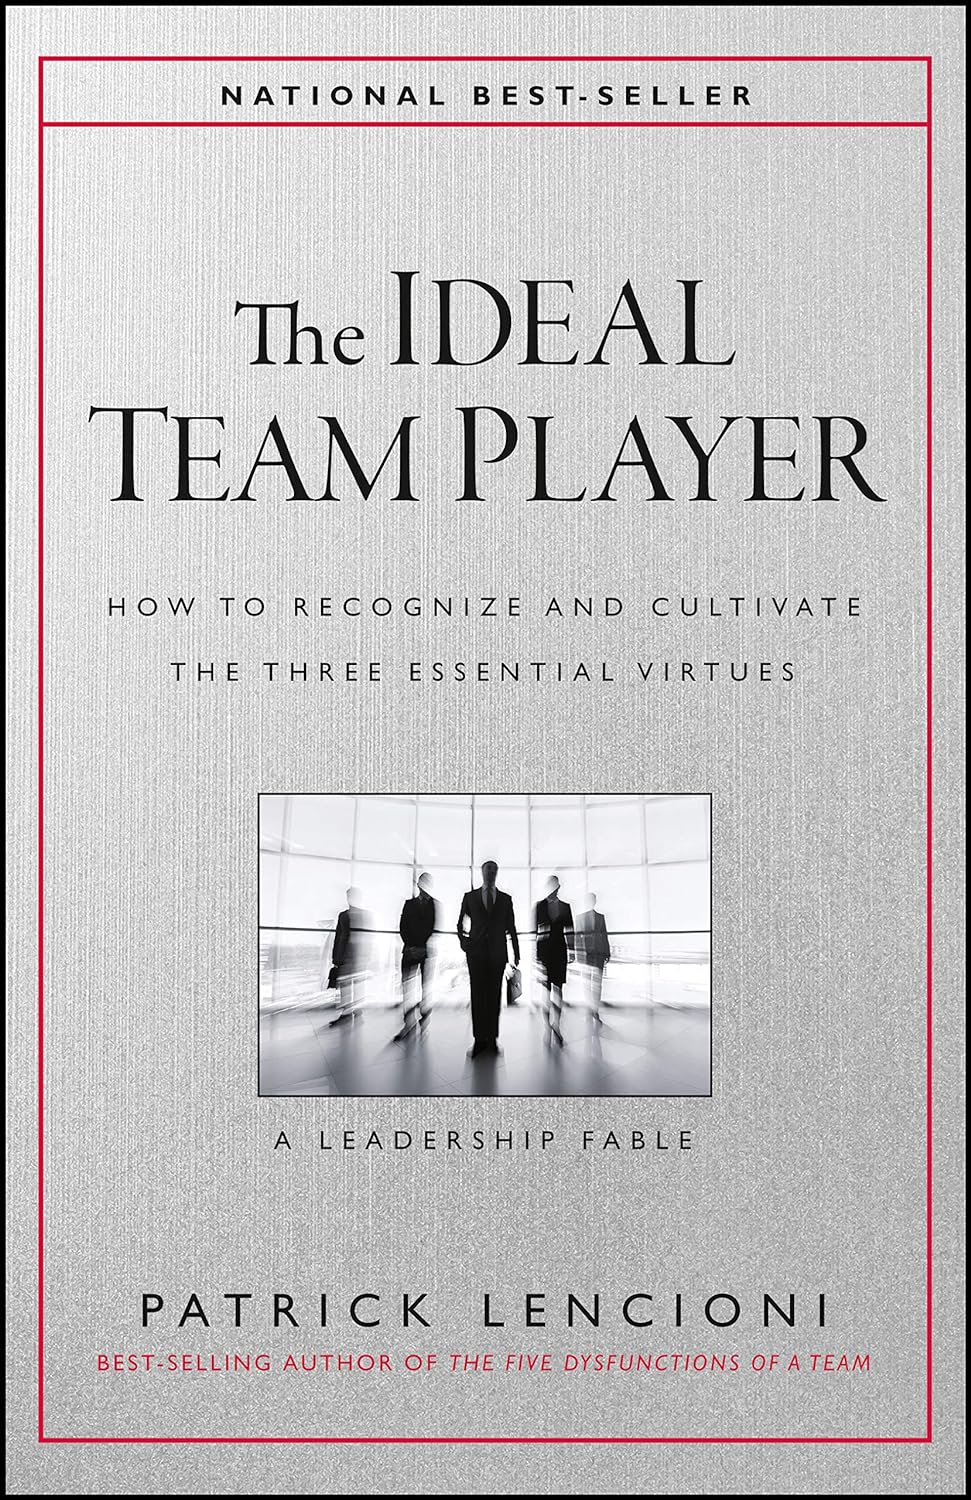 Patrick Lencioni - The Ideal Team Player. How to Recognize and Cultivate The Three Essential Virtues (J-B Lencioni Series)